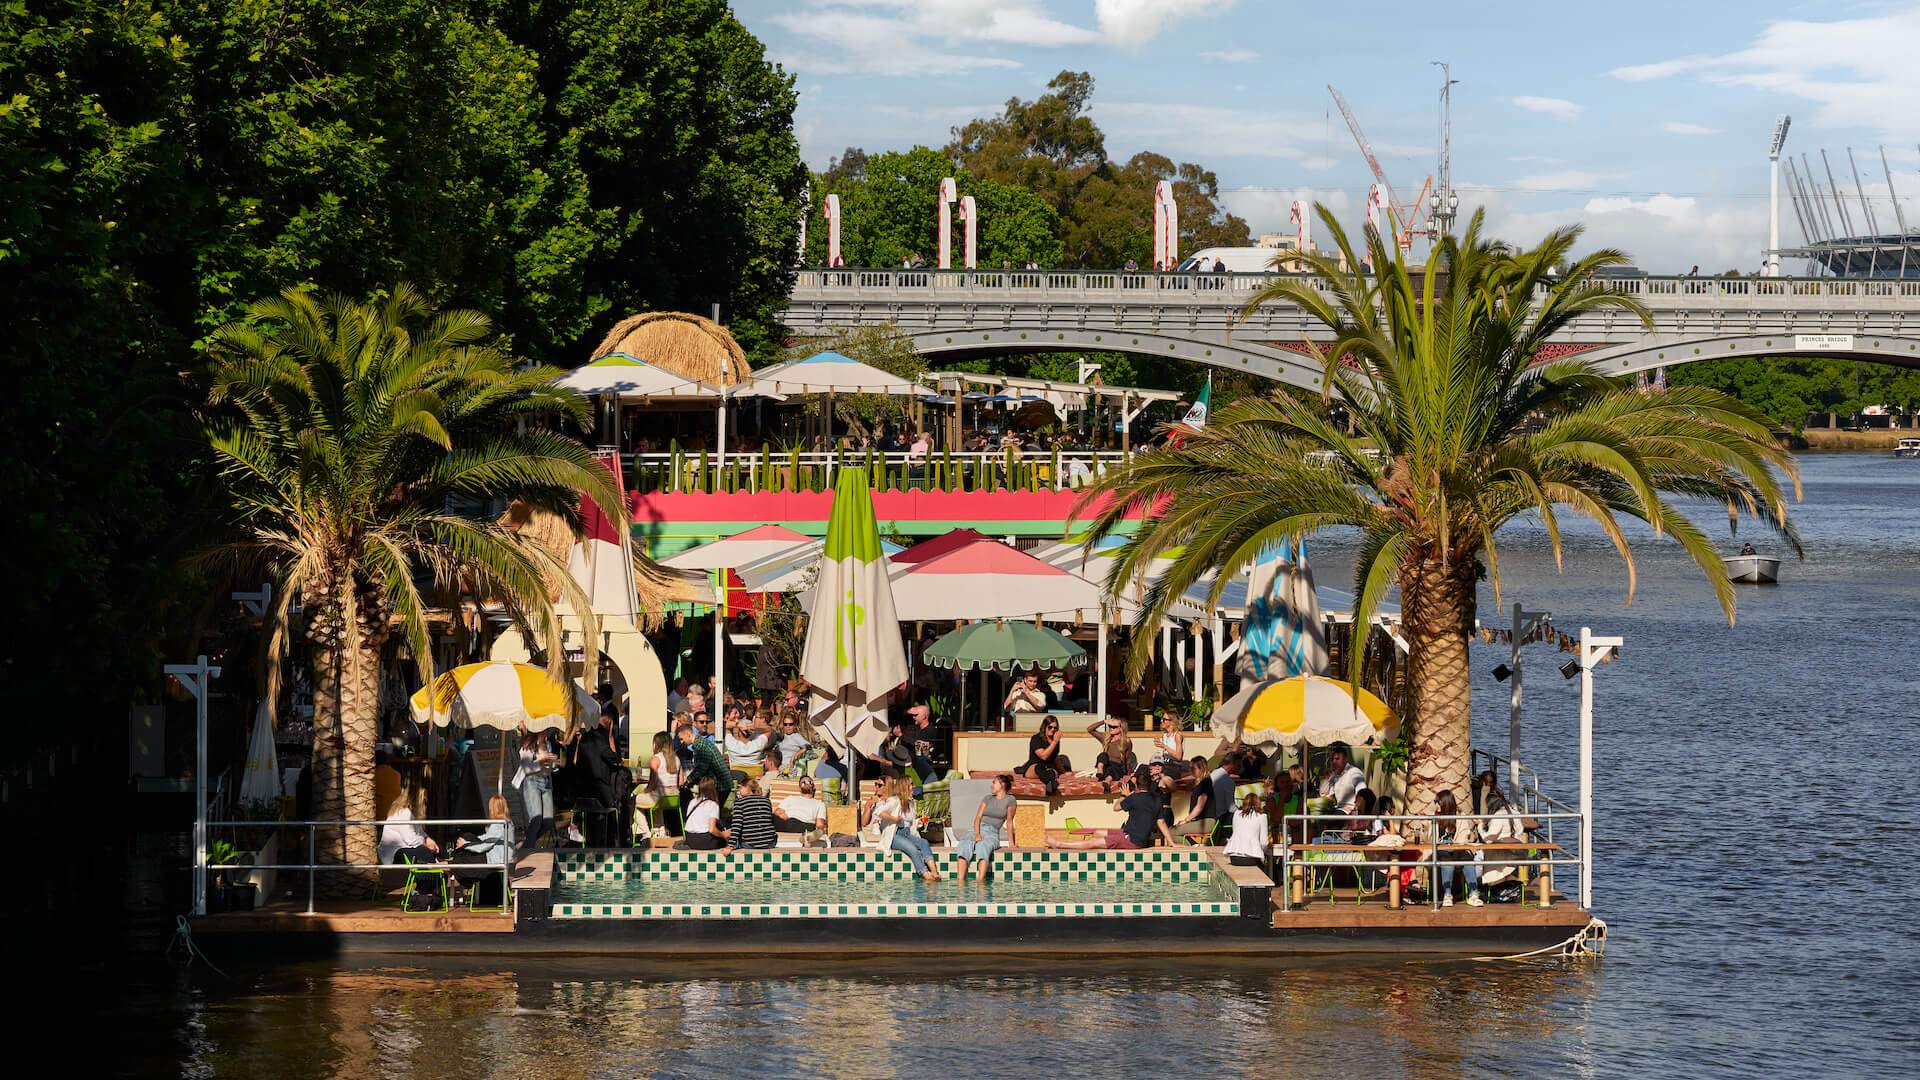 Arbory Afloat Pool Club on the Yarra River, Melbourne CBD.